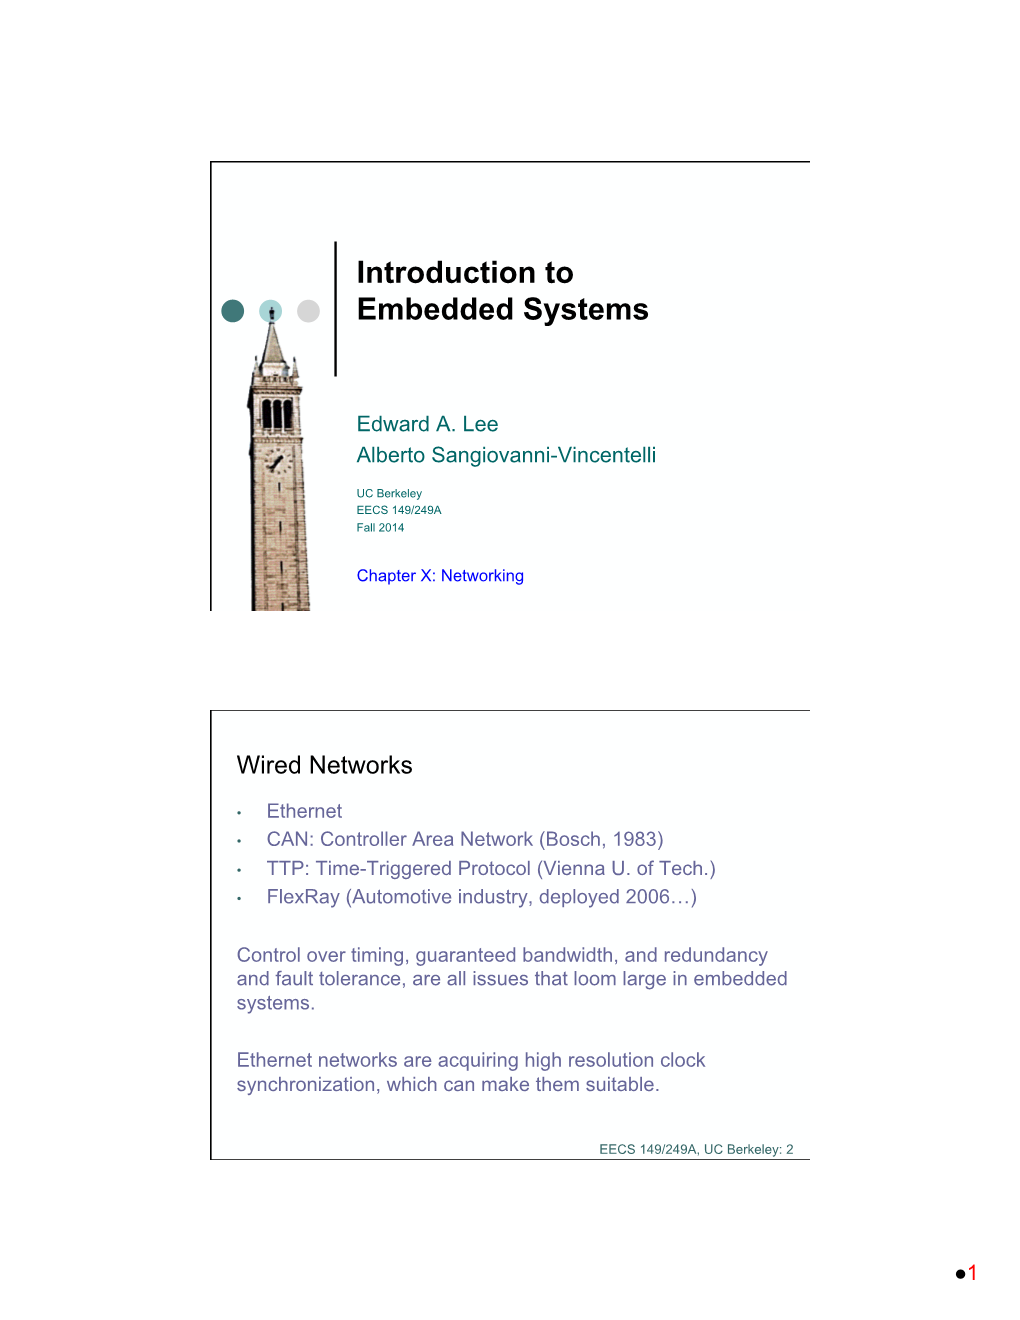 Networked Embedded Systems